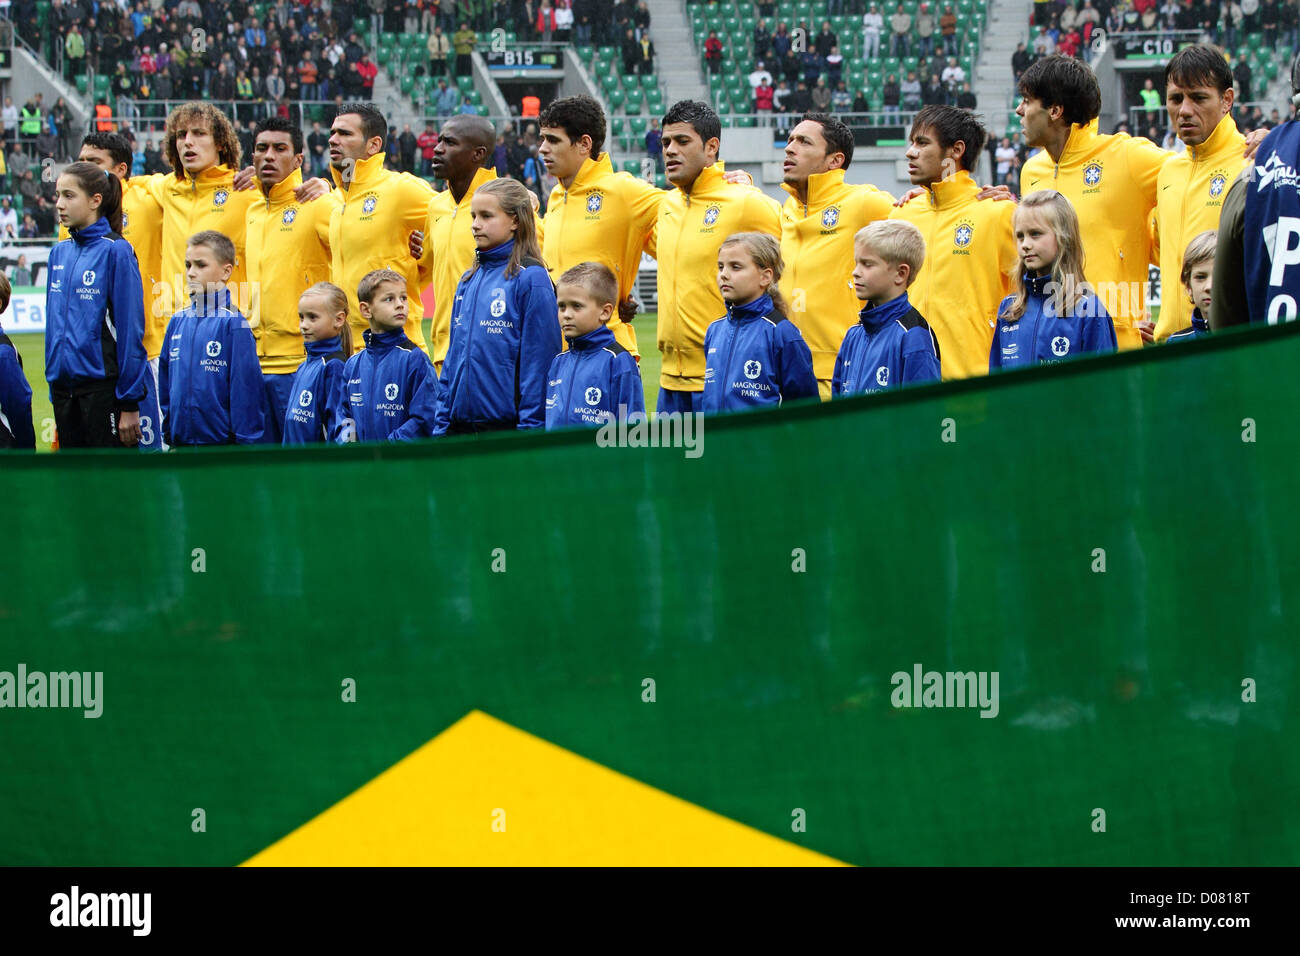 Brazil team group line-up (BRA),  OCTOBER 16, 2012 - Football / Soccer : of Japan in action during the International Friendly Match between Japan - Brazil at Stadion Wroclaw, Wroclaw, Poland.  (Photo by AFLO) [2268] Stock Photo